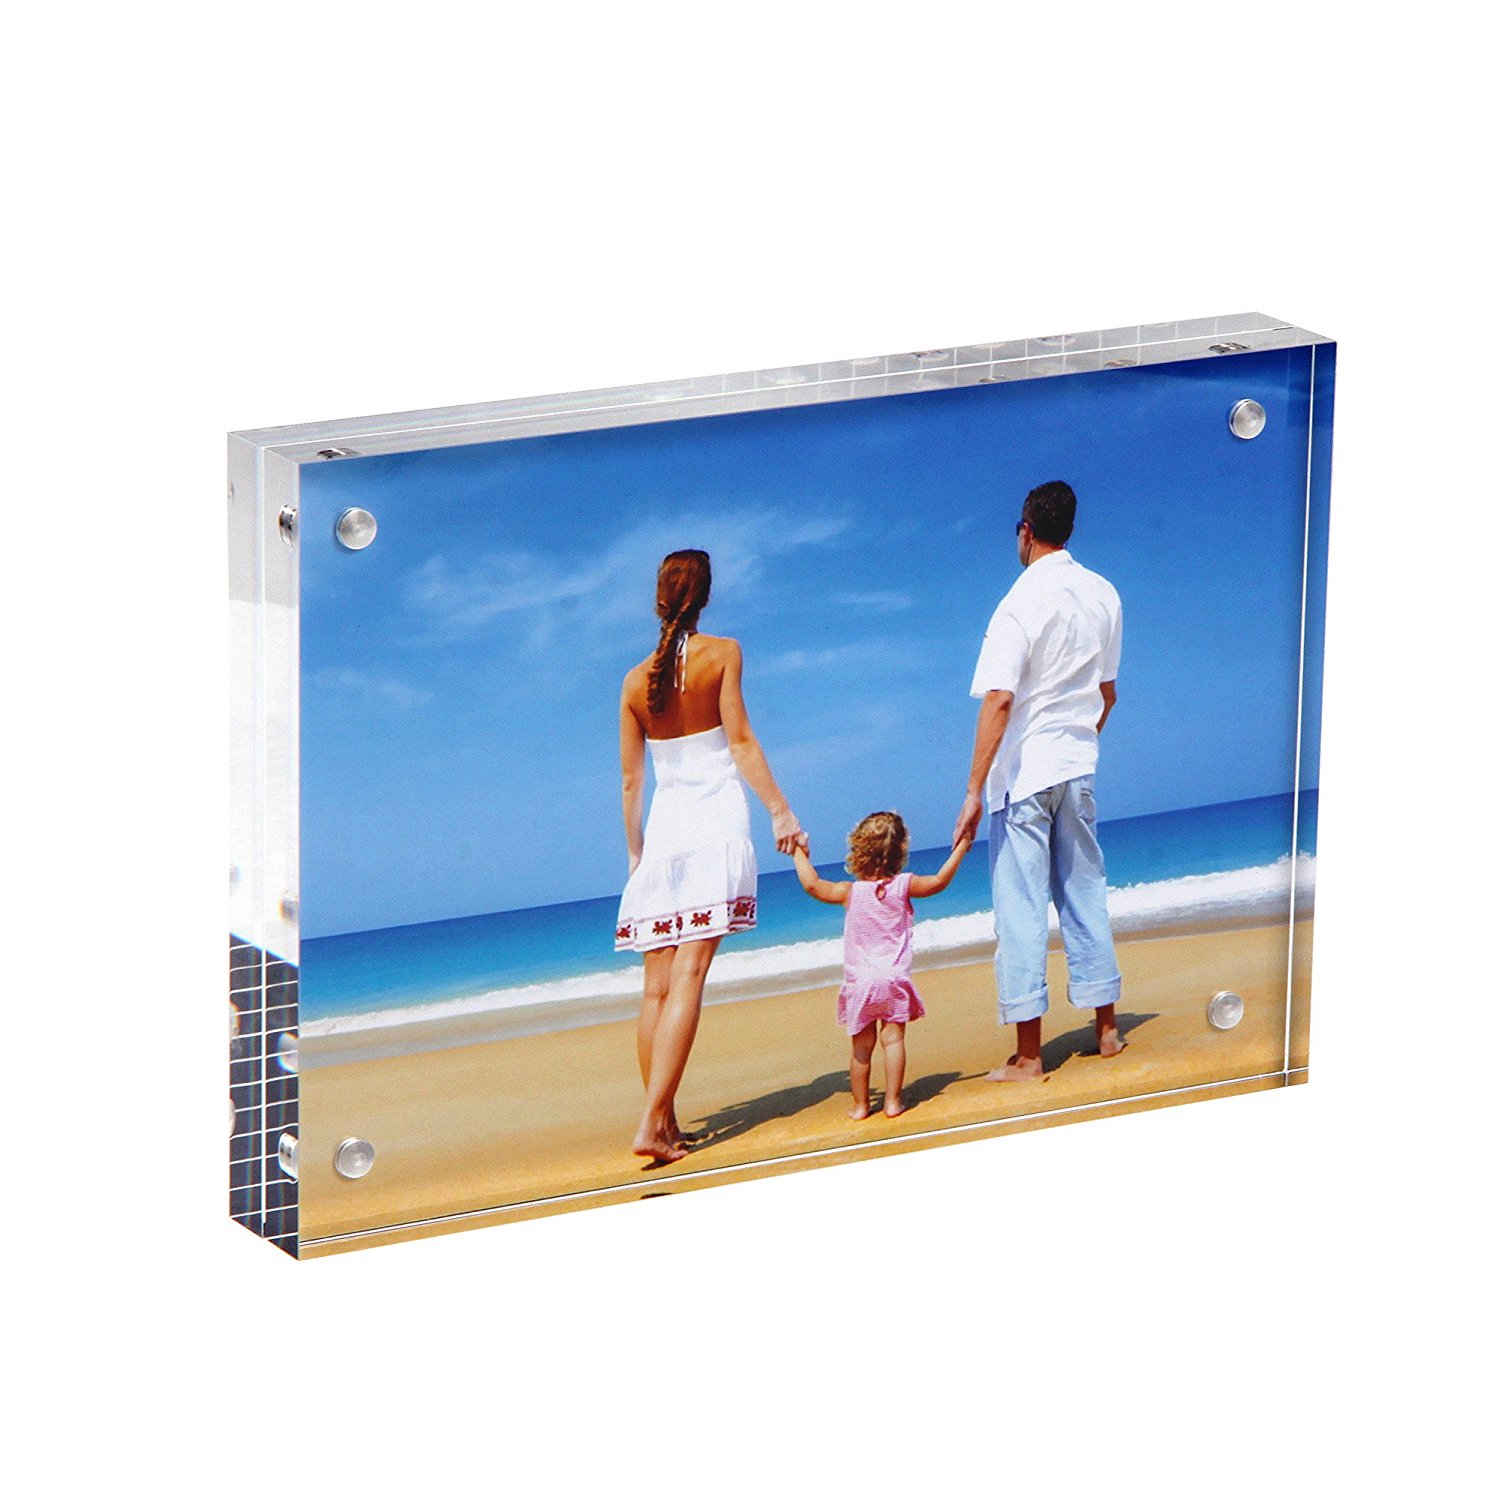 Niubee Clear Acrylic Photo Frame 4x6" Gift Box Package, Double Sided Magnetic Acrylic Block Picture Frames, Frameless Desktop Postcard Display